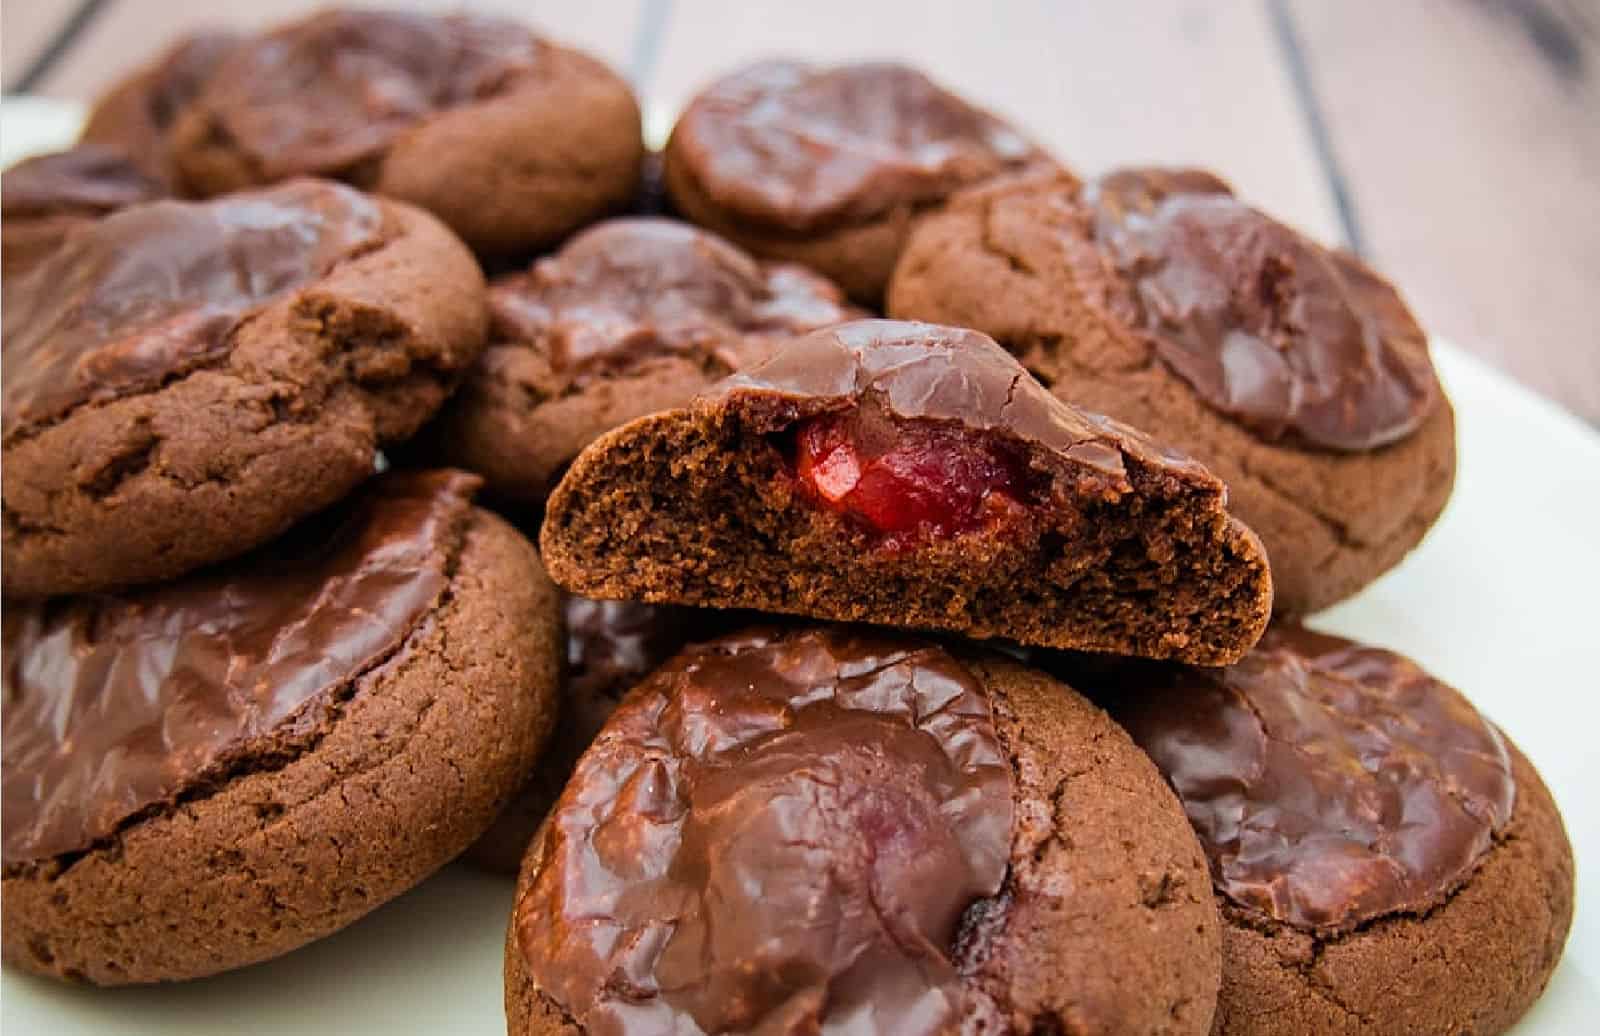 Plate of chocolate cookies with icing with one cut open to show the cherry inside.